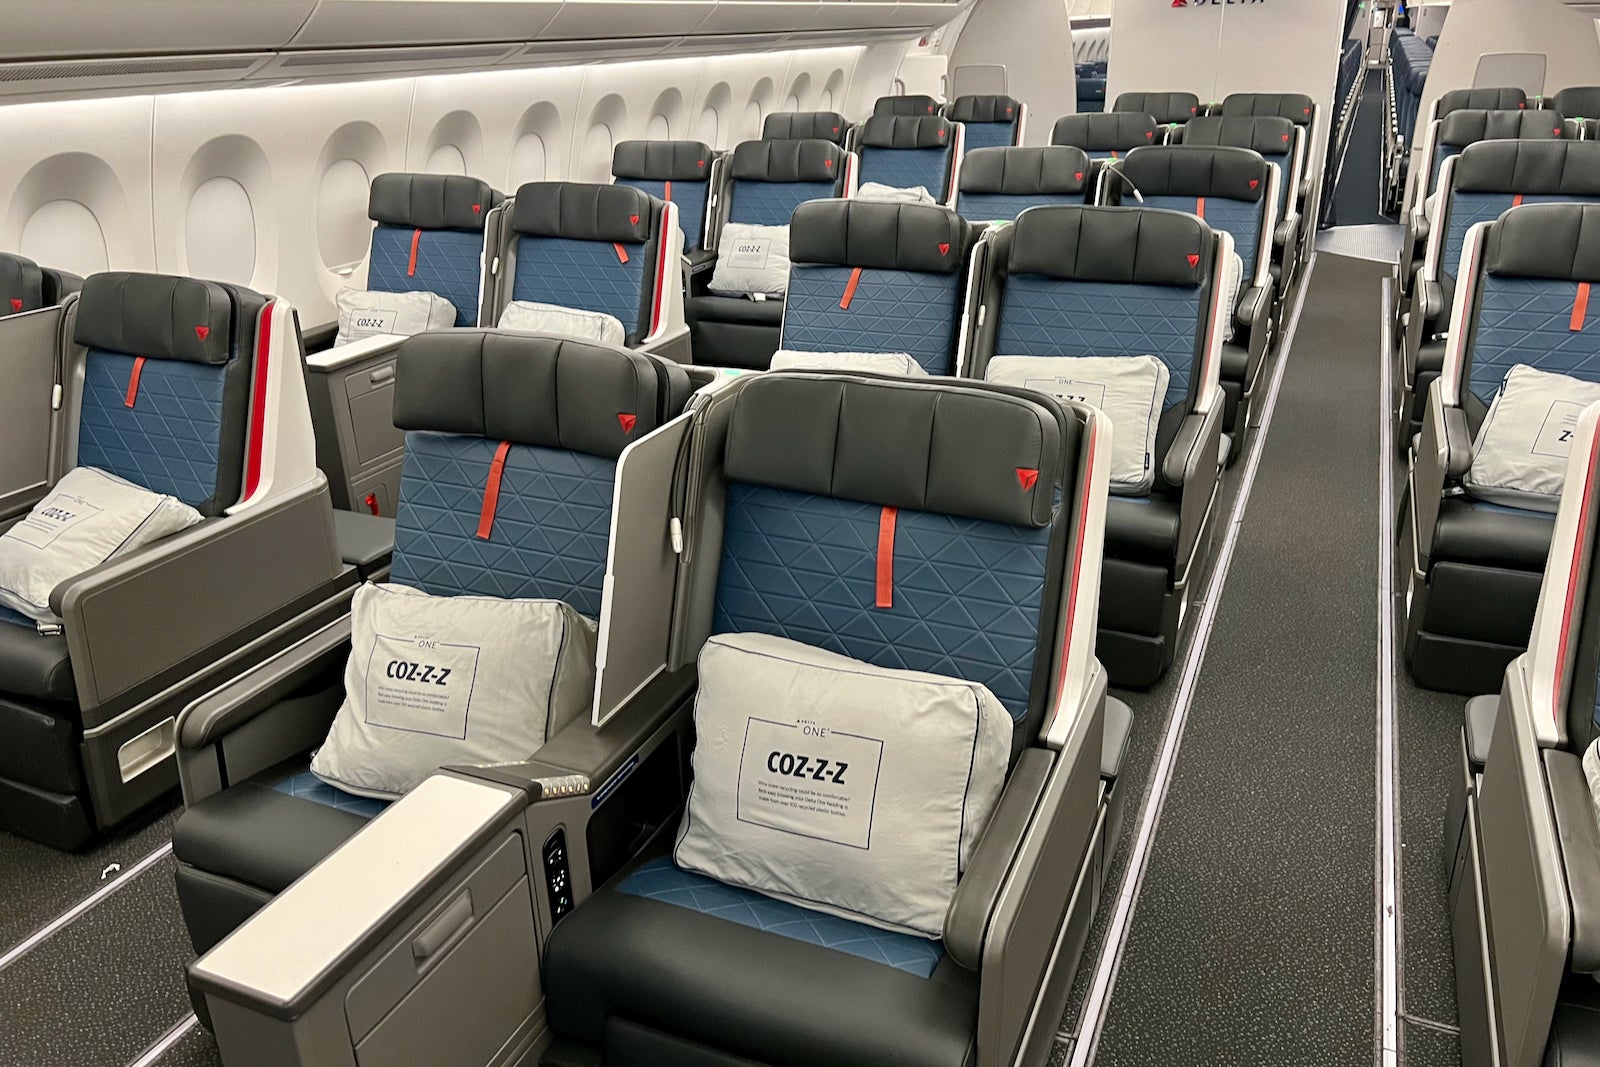 delta confirms an all-new a350 configuration is coming soon